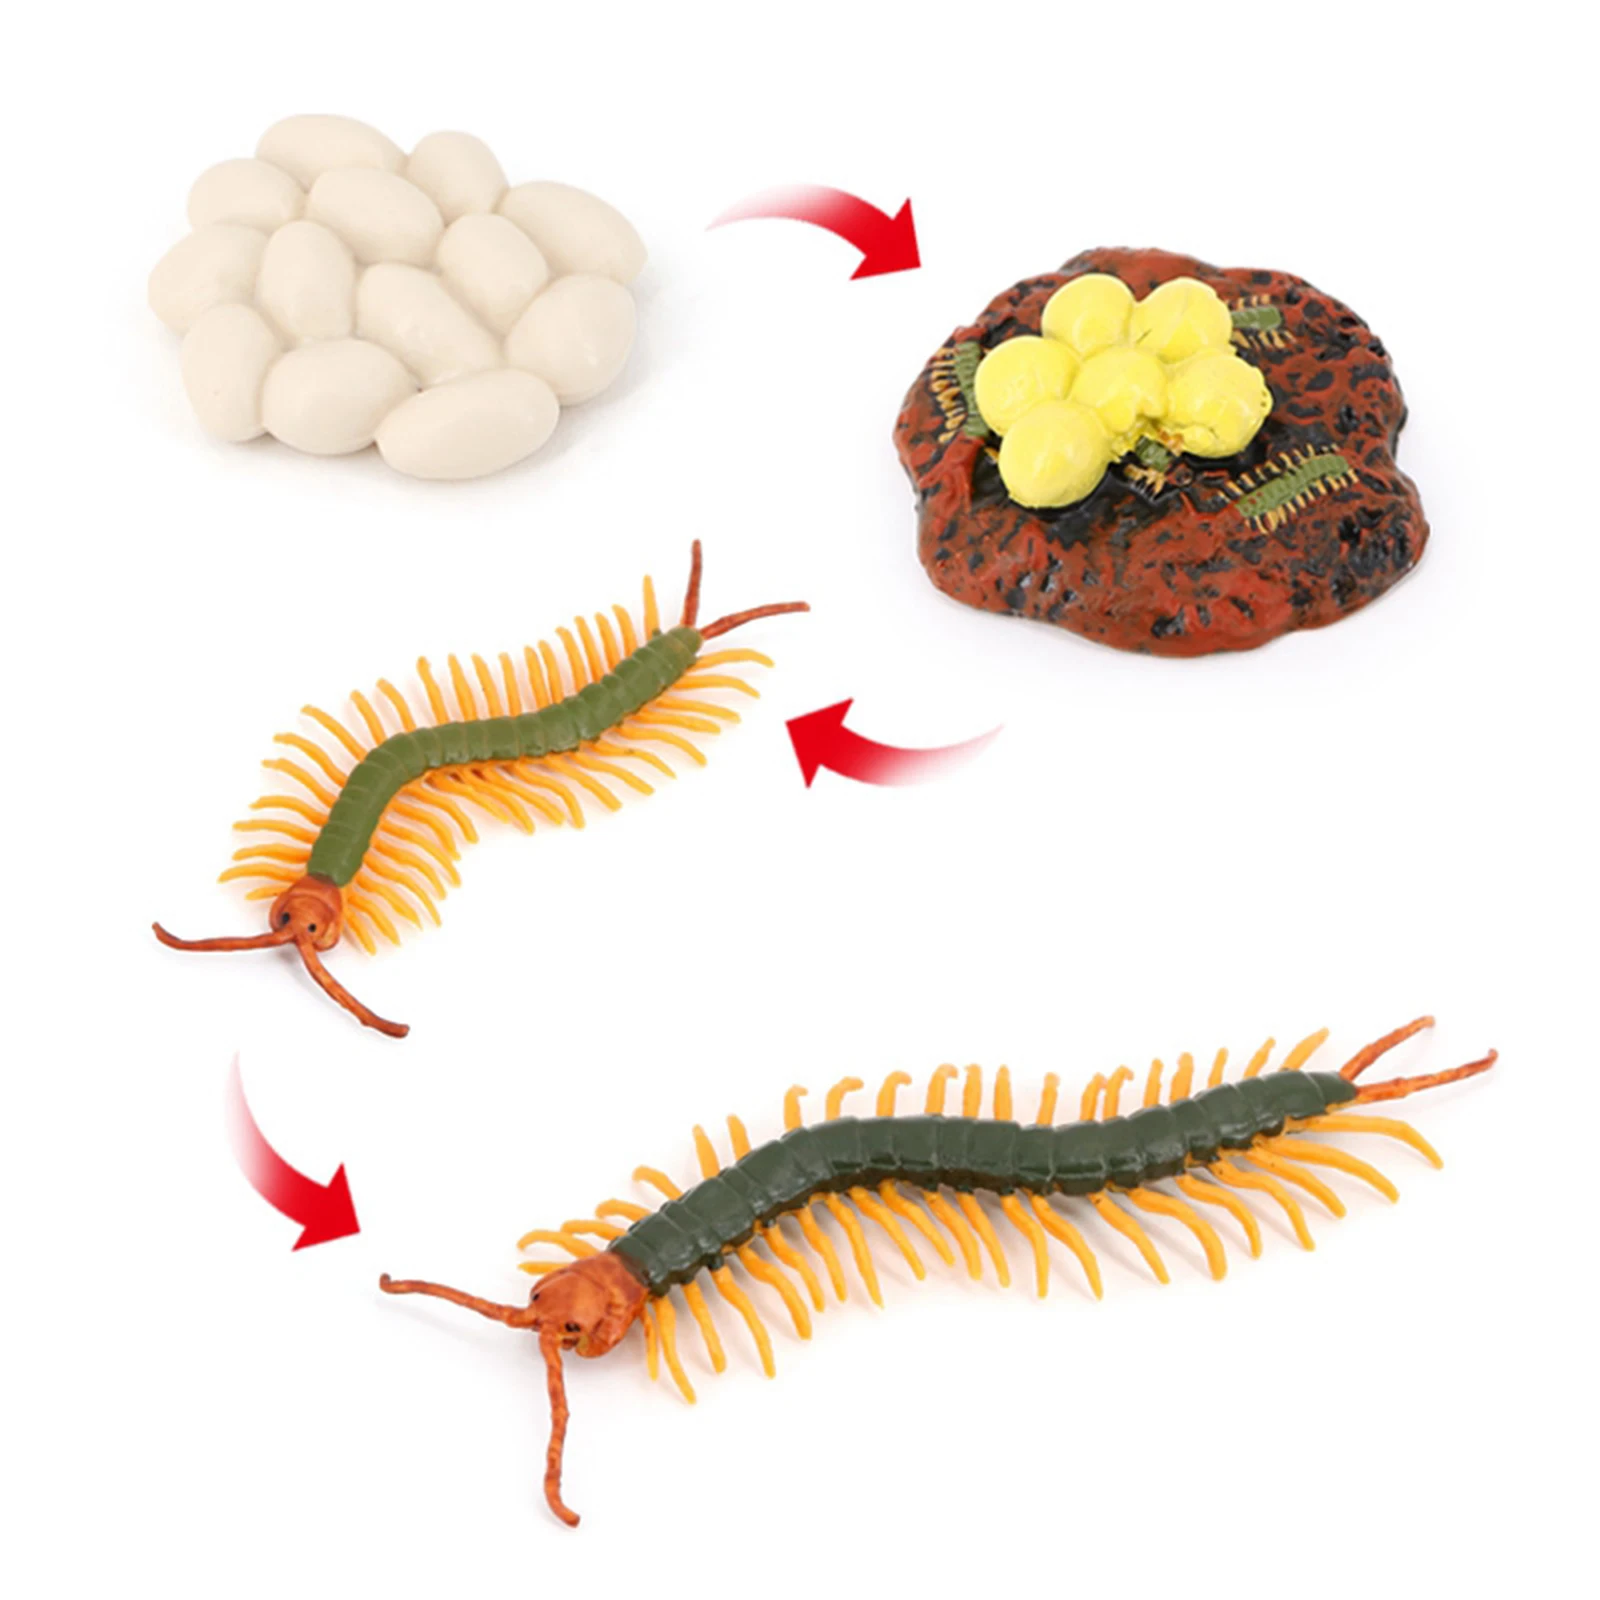 Life Cycle of a CentipedeNature Insects Life Cycles Growth Model Game PropSimulation Insect Animal Natural Education Toy